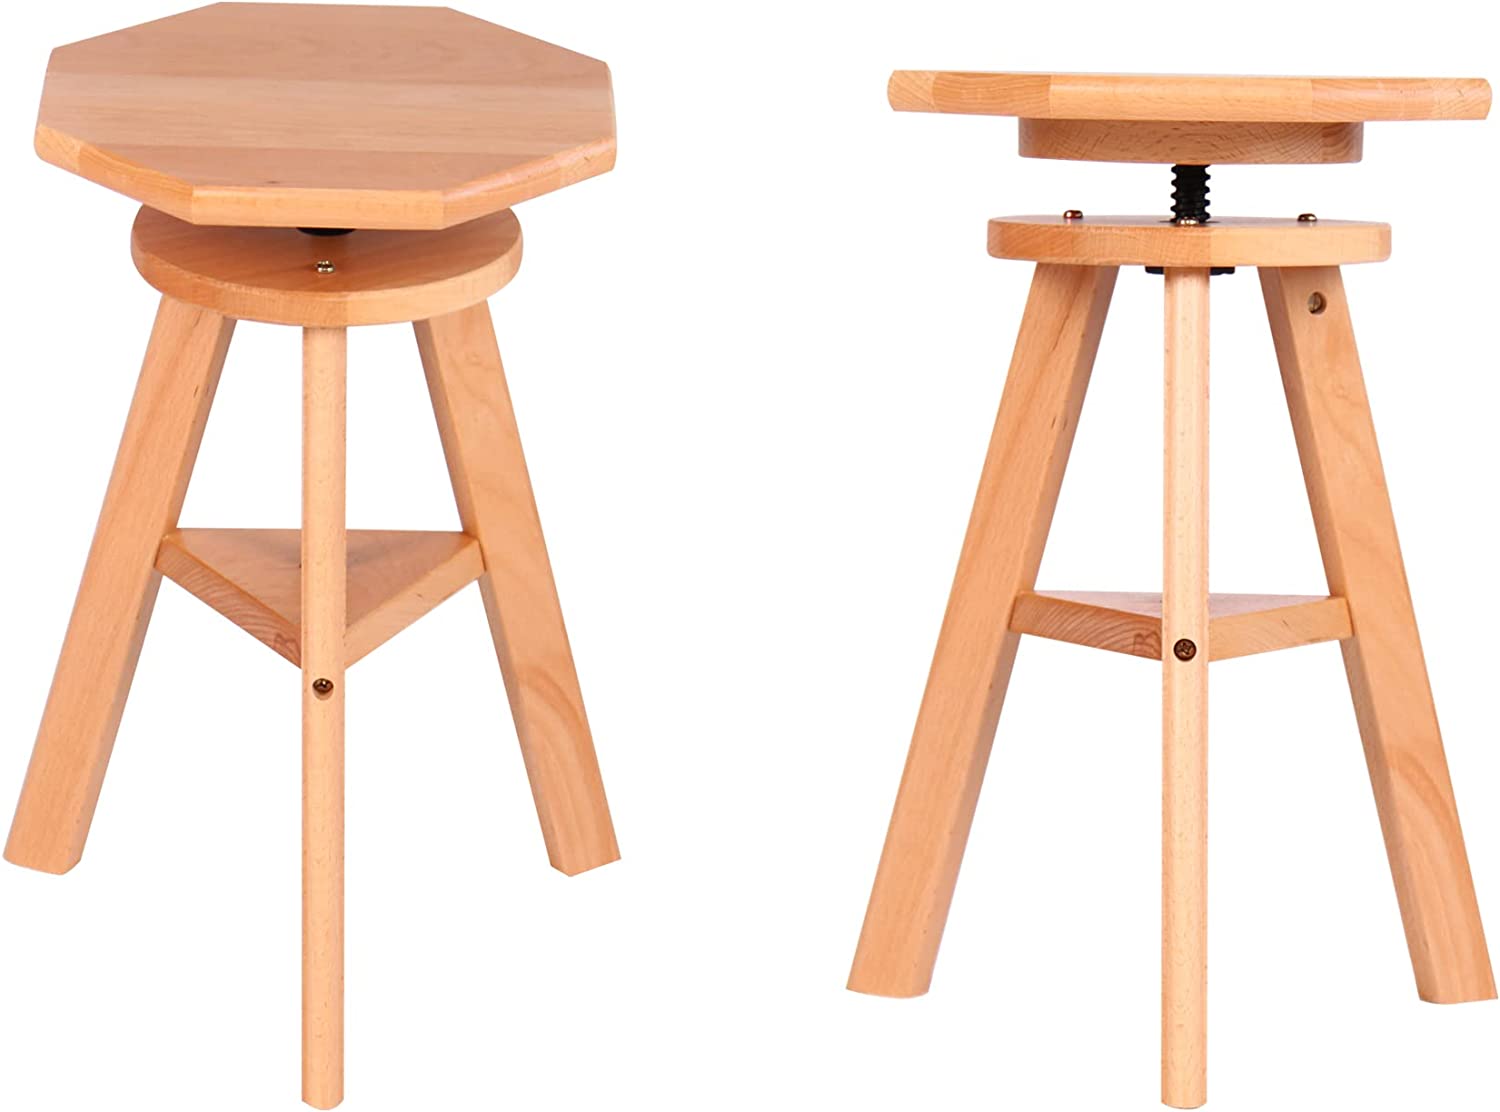 Suitable for Artists Office Kitchen Artist Stool for Drafting Table PETKABOO Wooden Drafting Stool Studio Home Adjustable Height Bars 